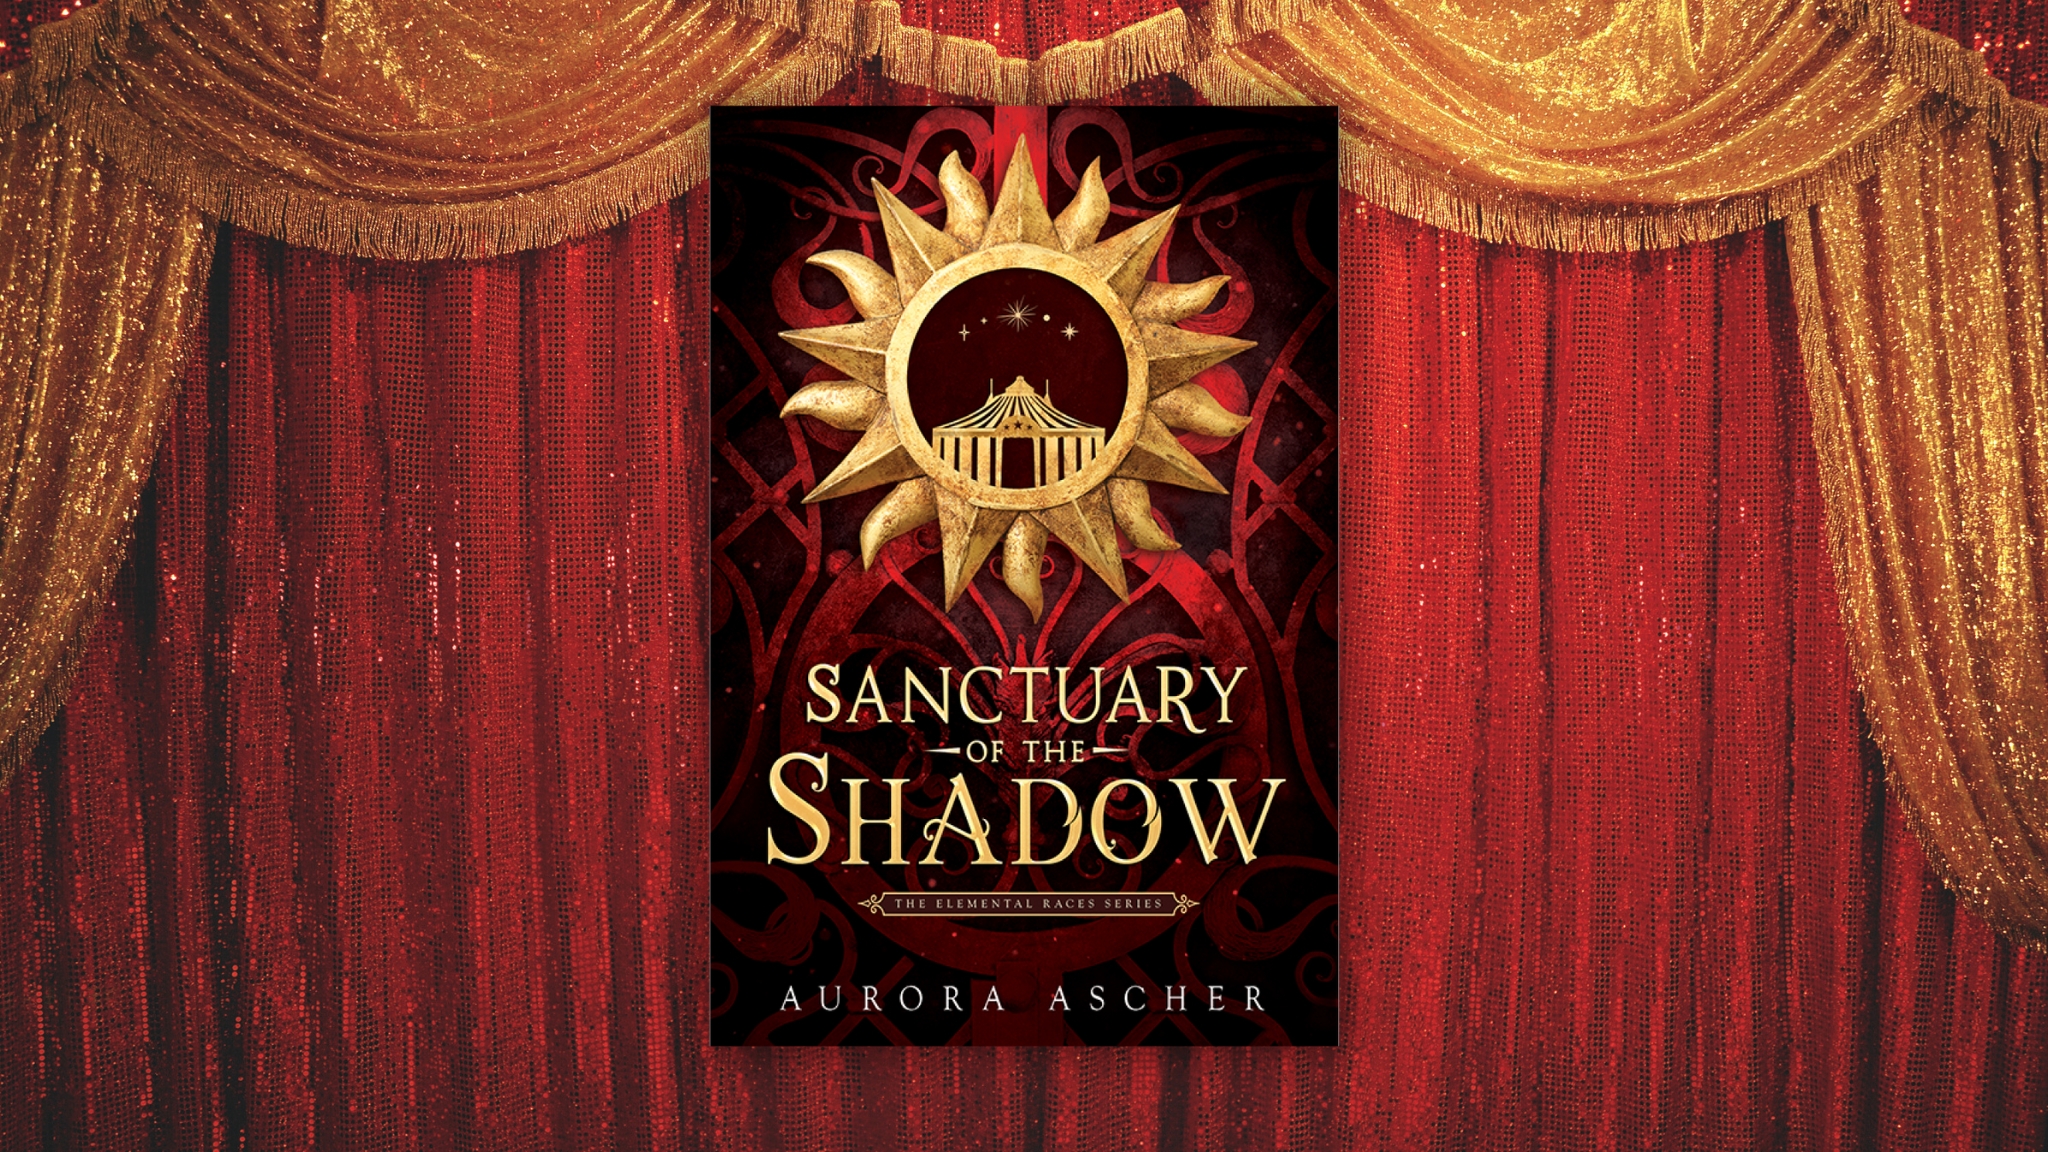 Sanctuary of the Shadow by Aurora Ascher | BookTrib